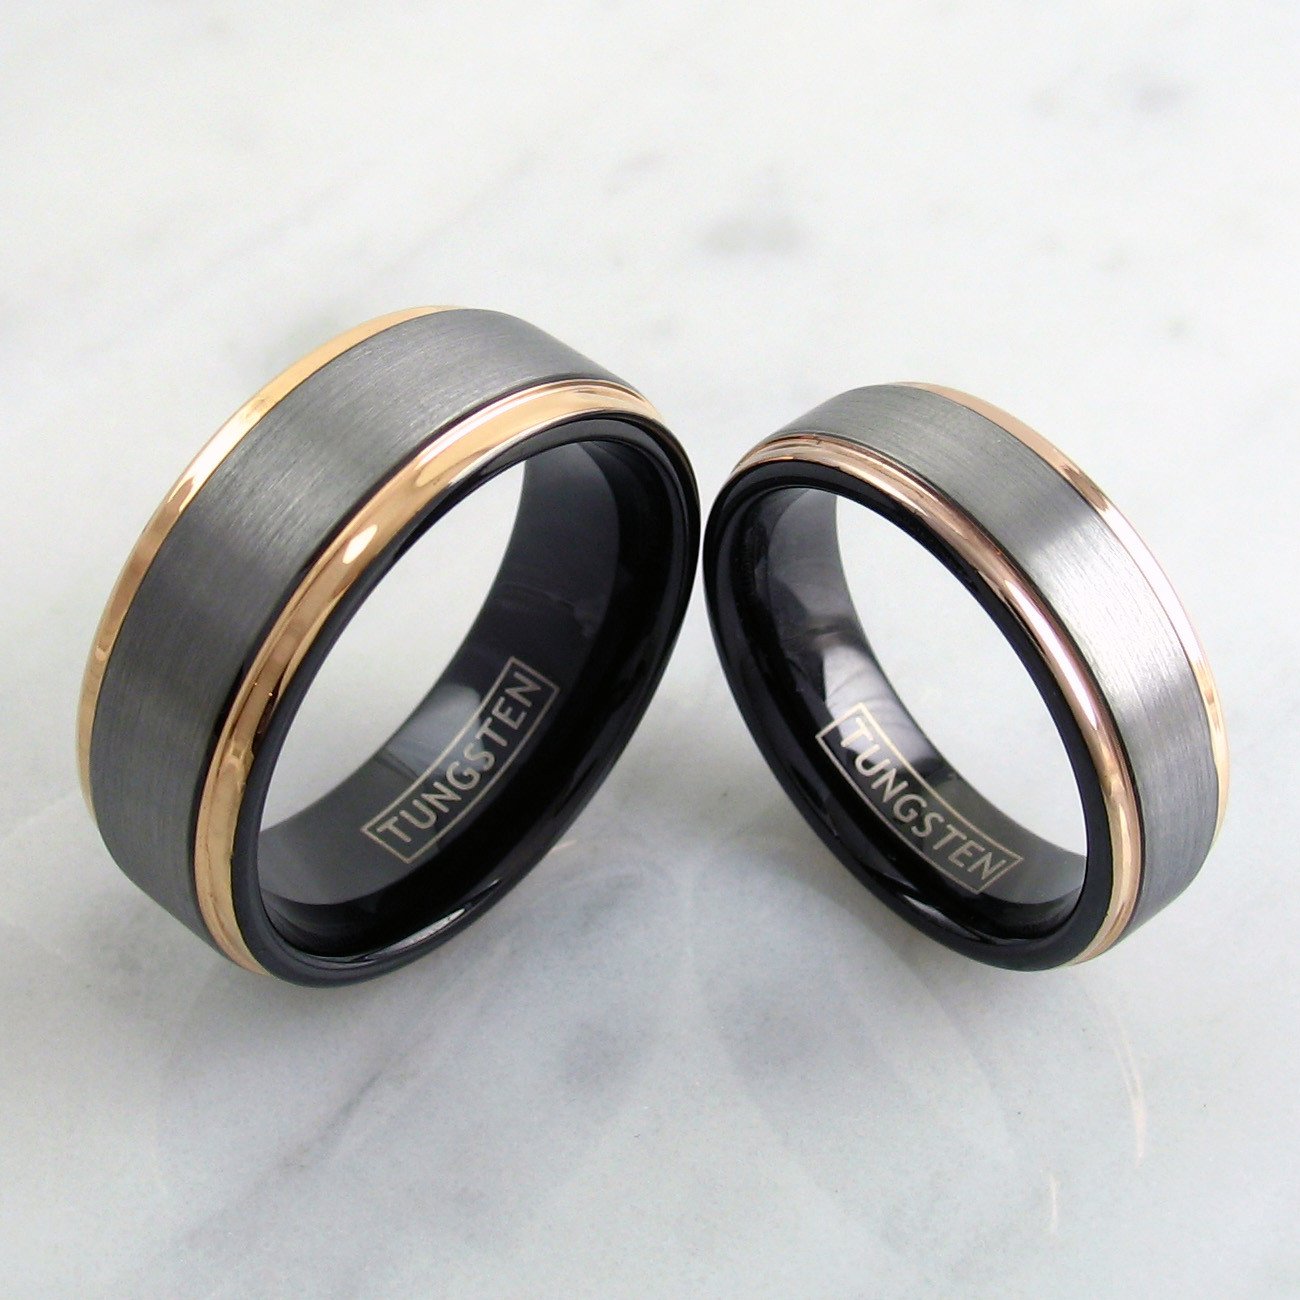 3-Tone Black Tungsten Ring w/ Silver Band & Rose Gold Edges. Wholesale 